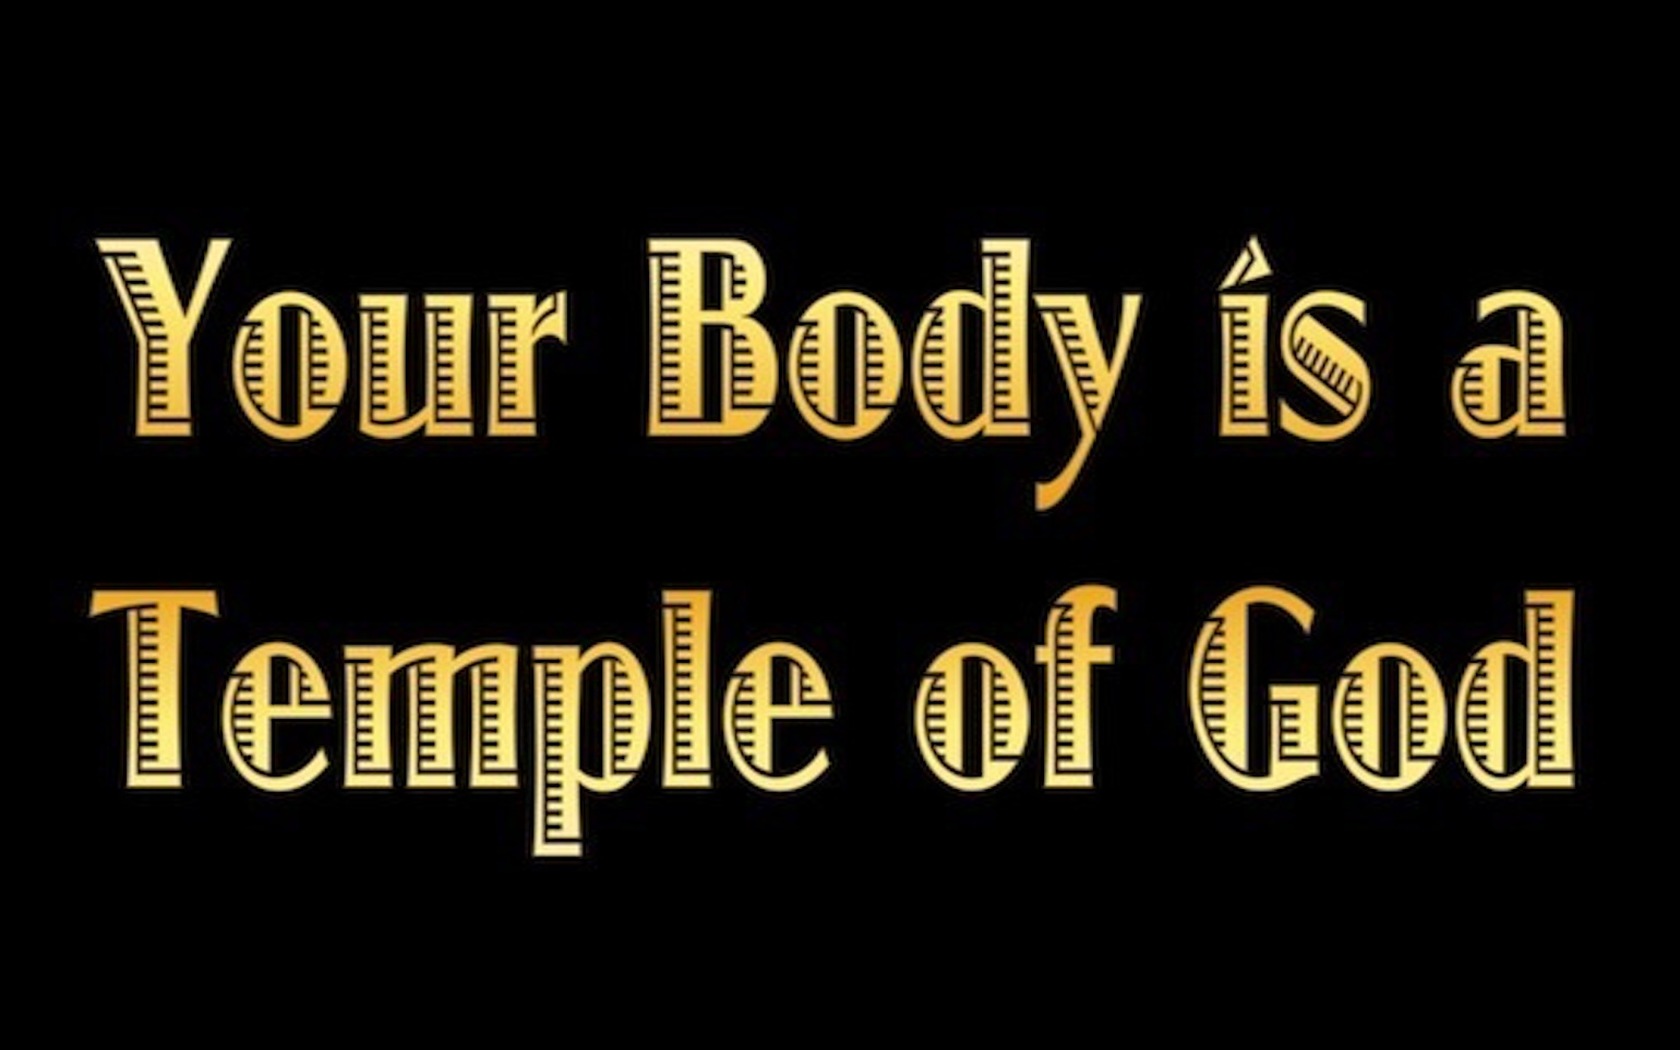 1 Corinthians 3:16 You Are A Temple of the Holy Spirit (gold)